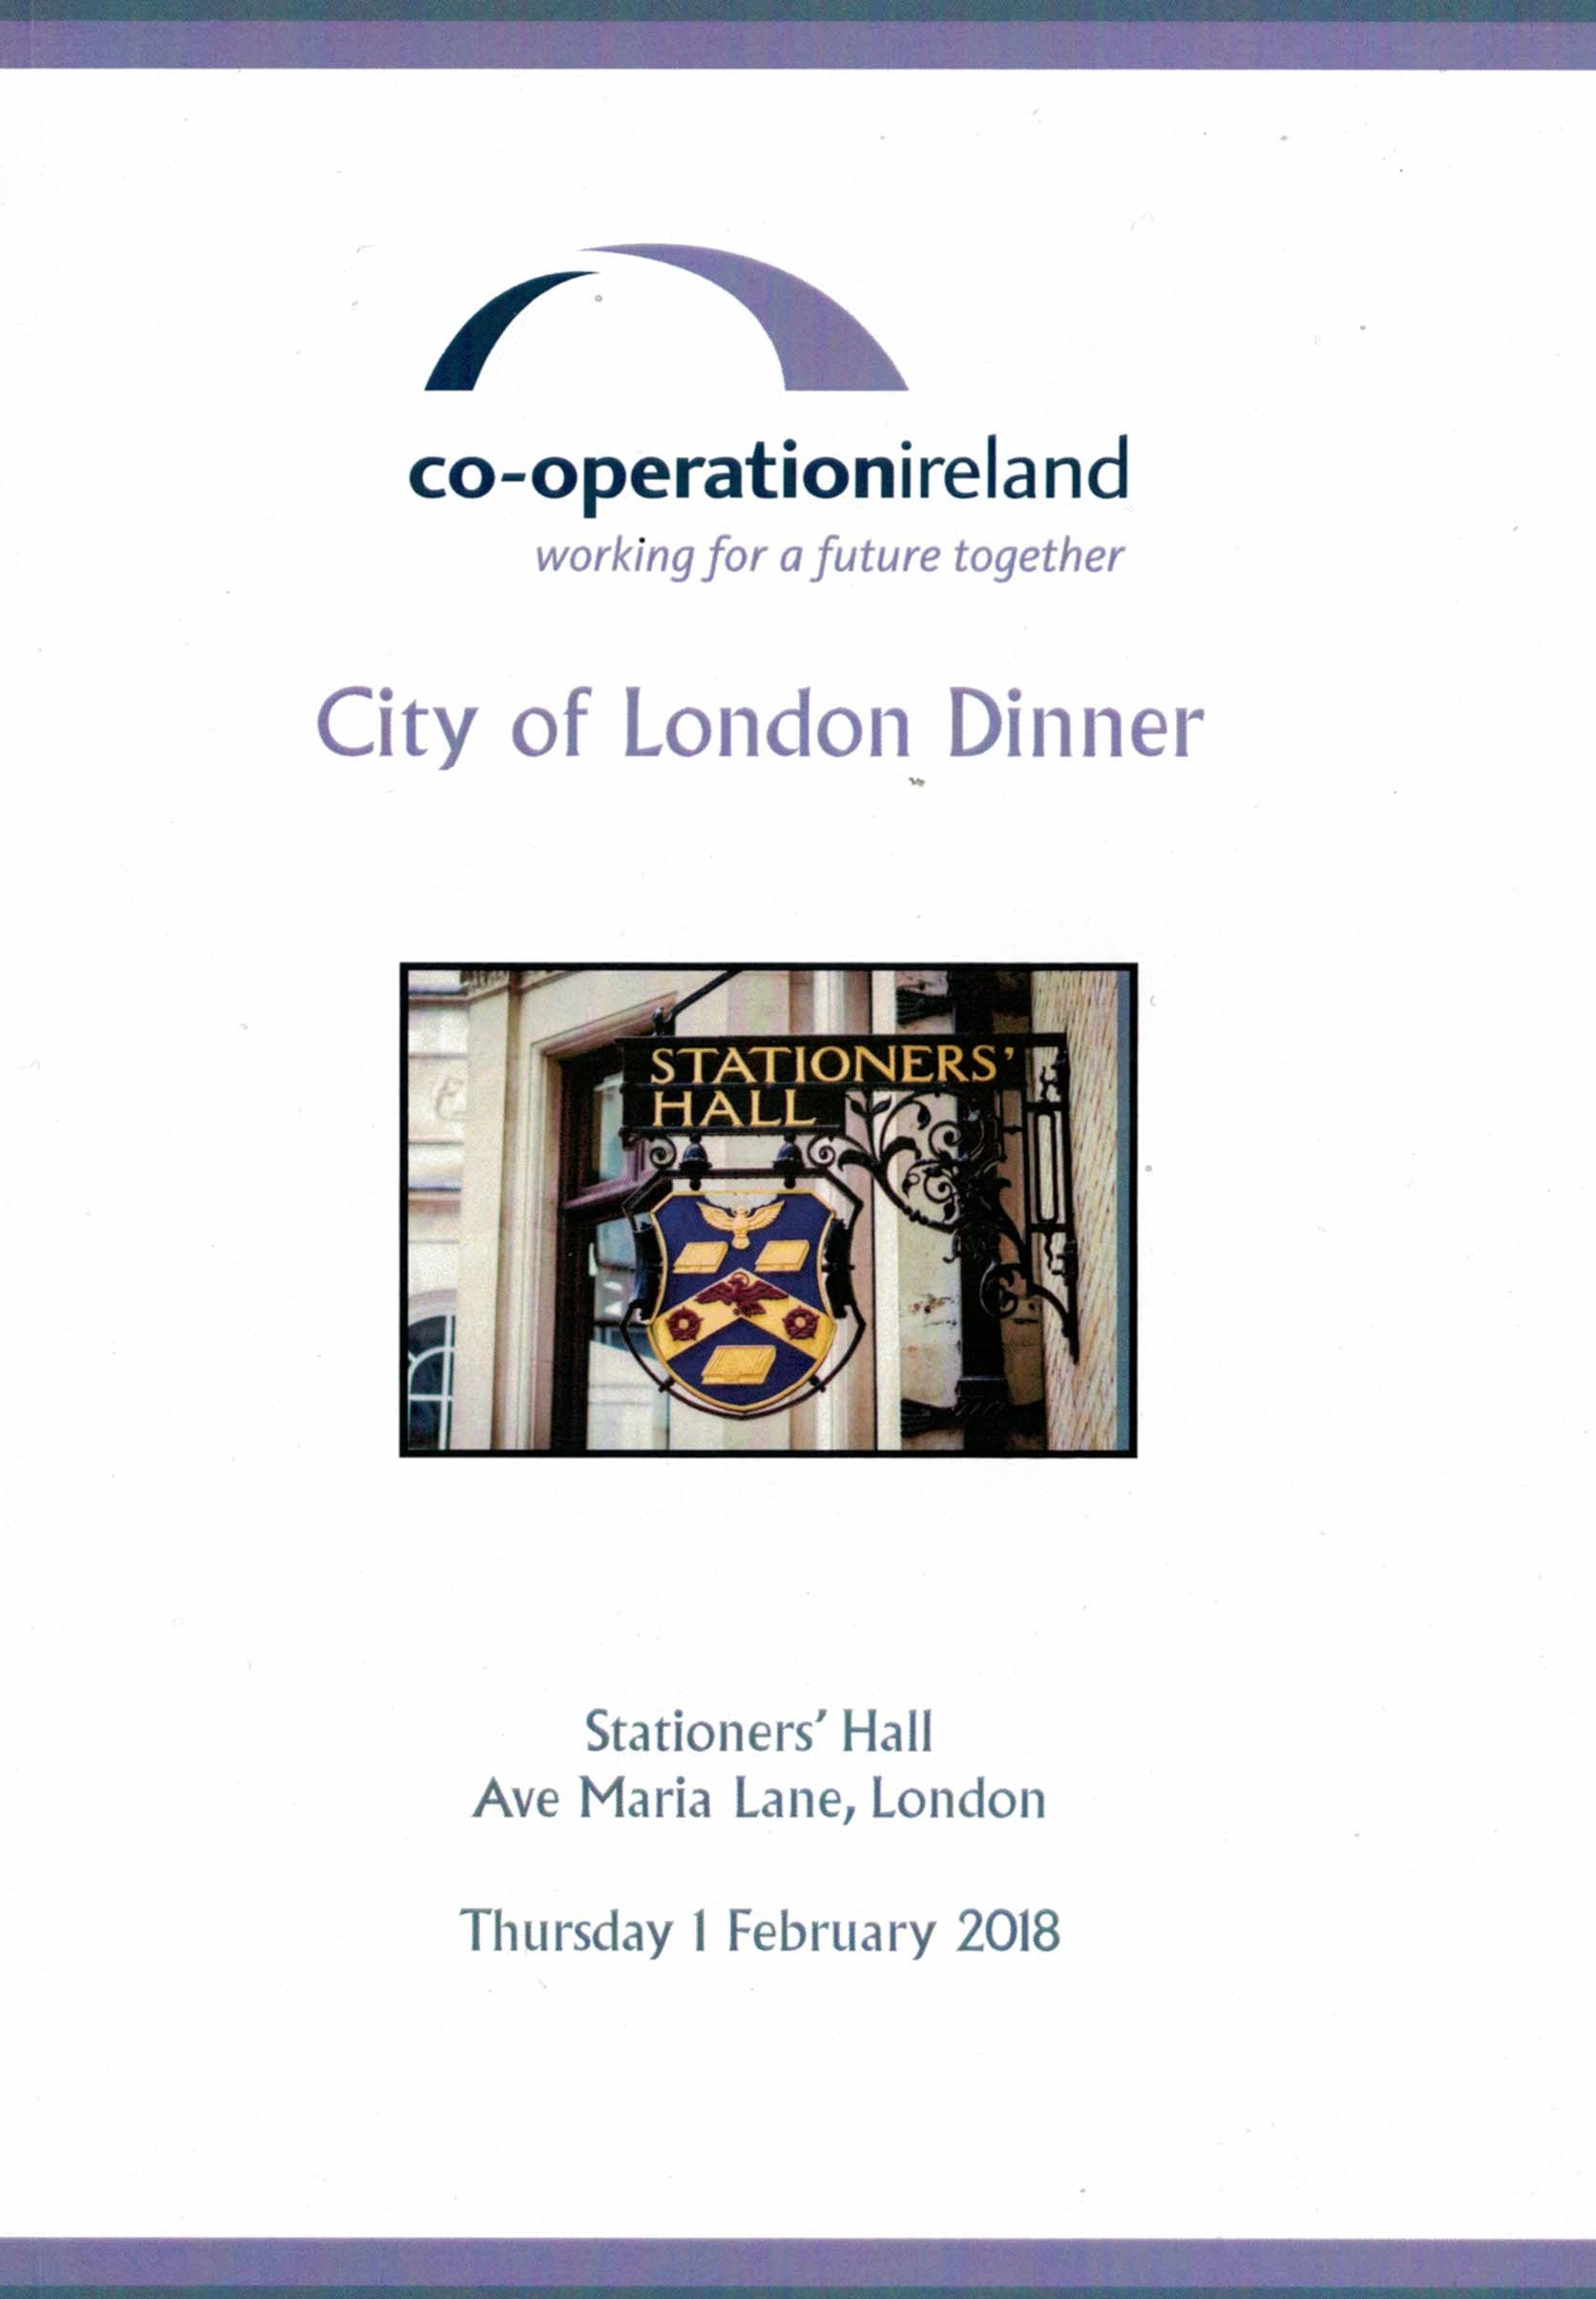 Co-operation Ireland - Dinner at Stationers' Hall, February 2018